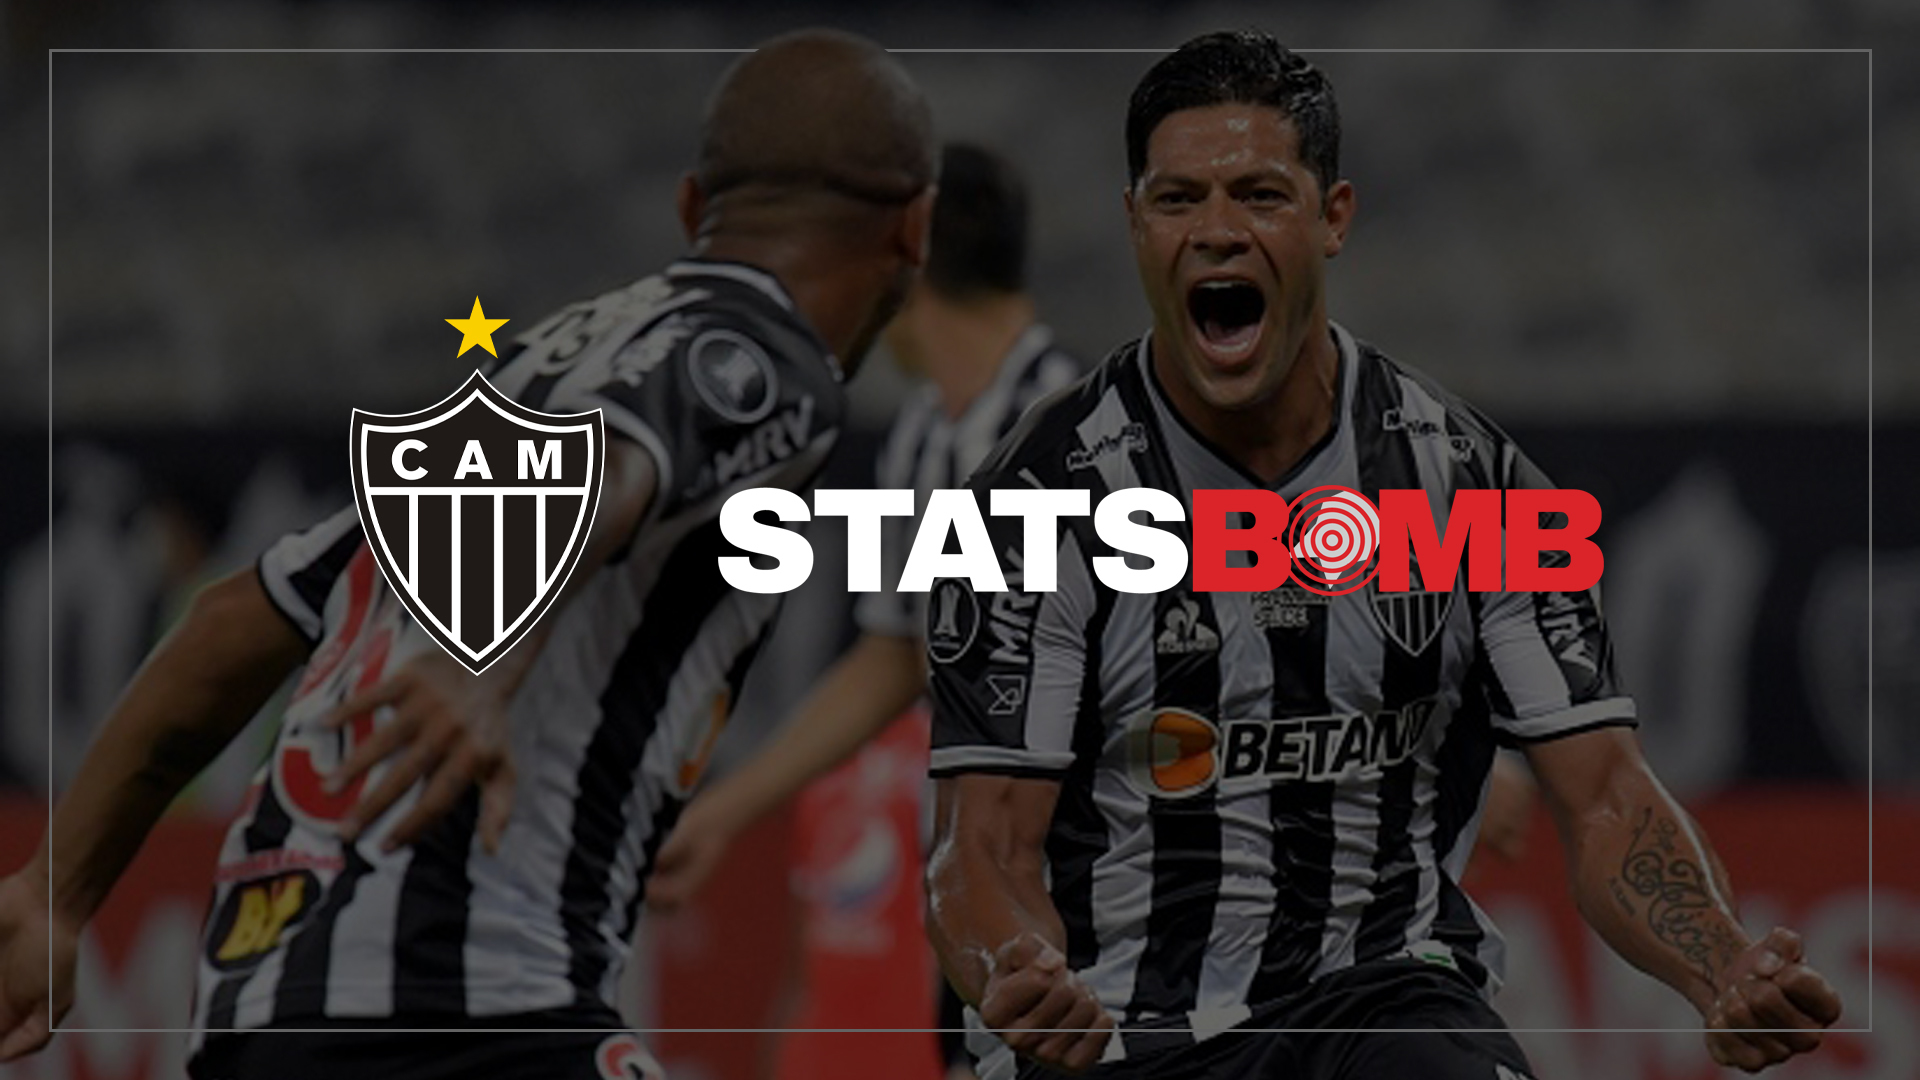 StatsBomb’s global growth continues with ground-breaking partnership with Clube Atlético Mineiro in Brazil